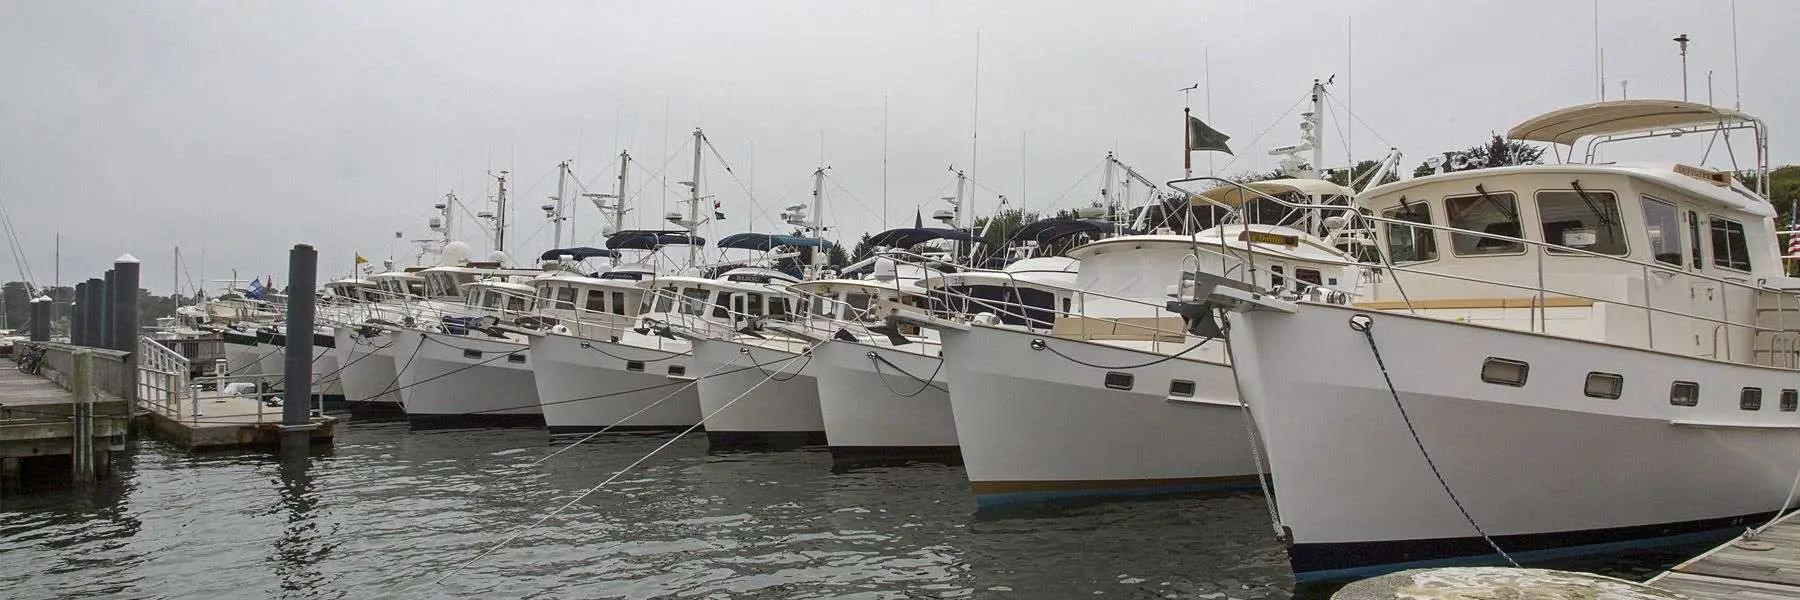 Low Rate Boat Loans